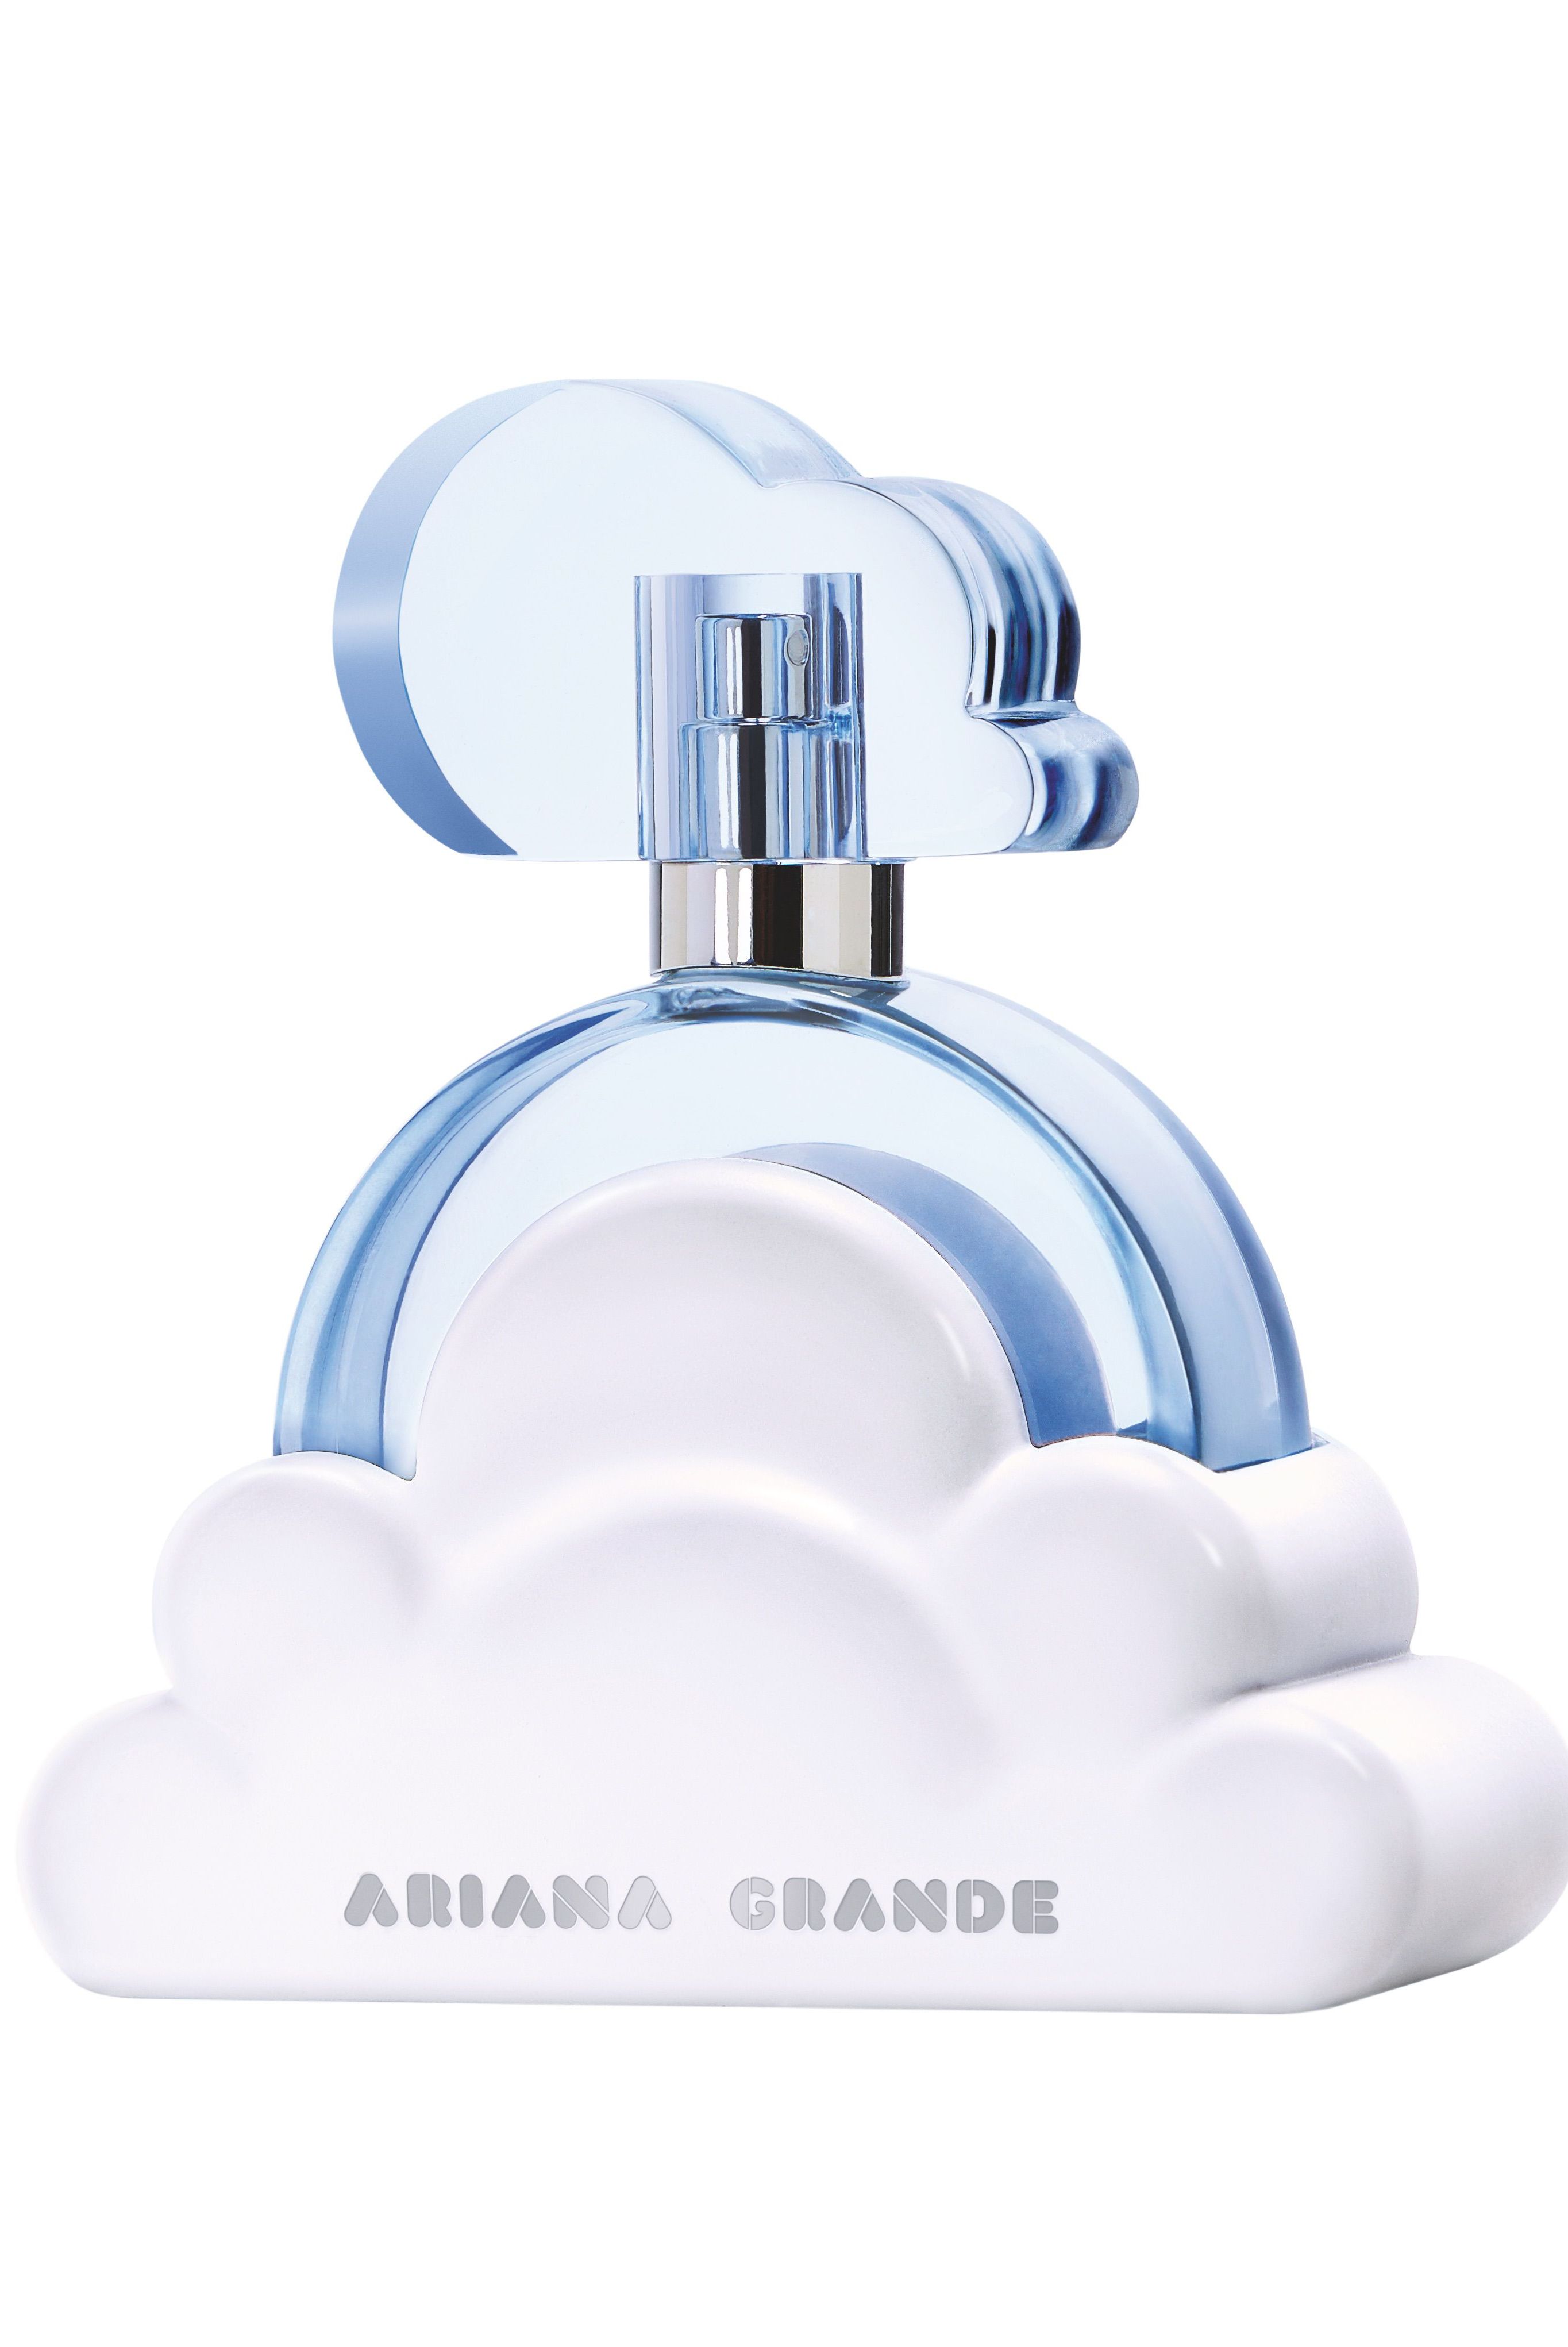 Ariana Grande Cloud Perfume 2019 Is This The Best